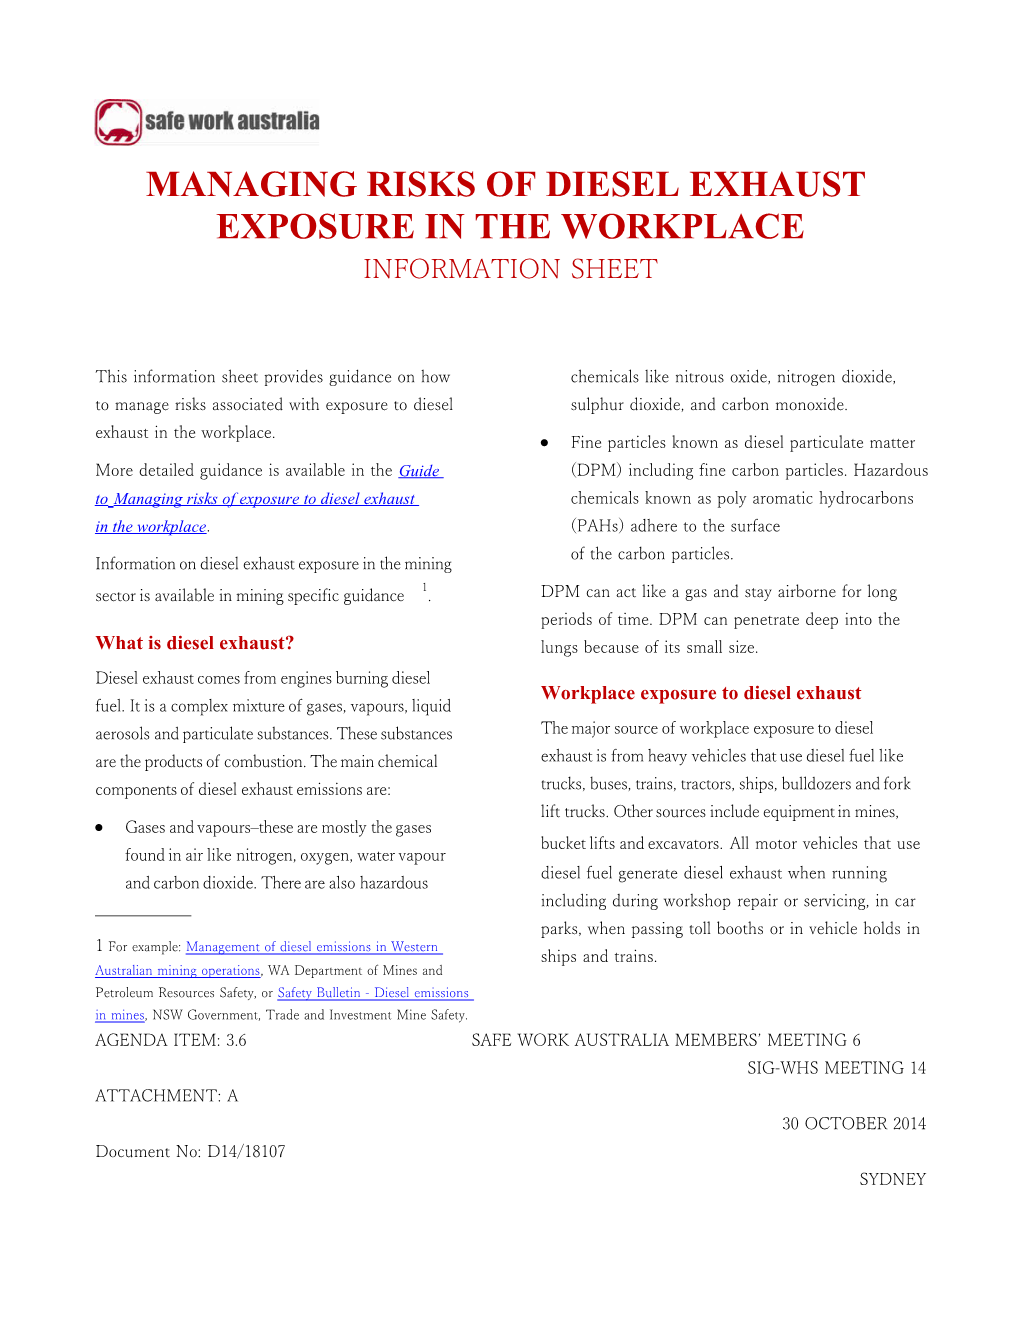 05. Managing Risks of Diesel Exhaust Exposure in the Workplace Information Sheet